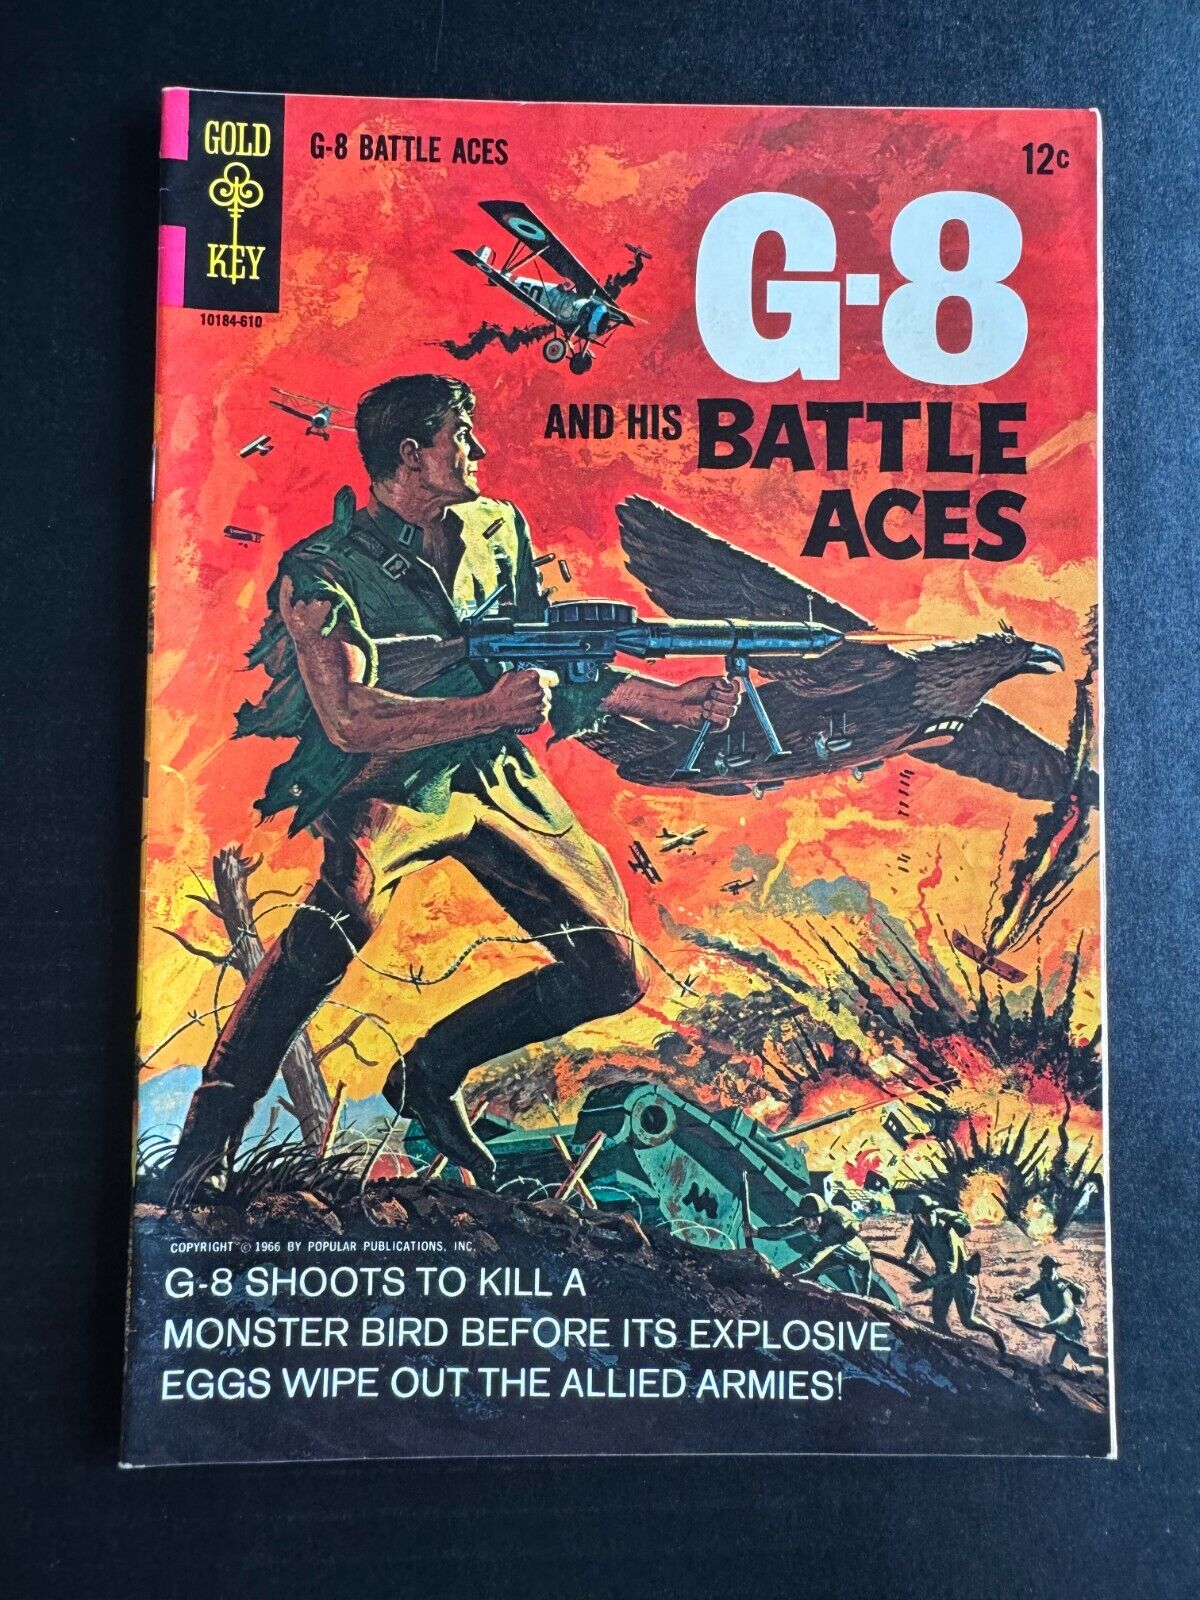 G-8 and His Battle Aces #1 - The Secret Weapon (Gold Key, 1966) VF